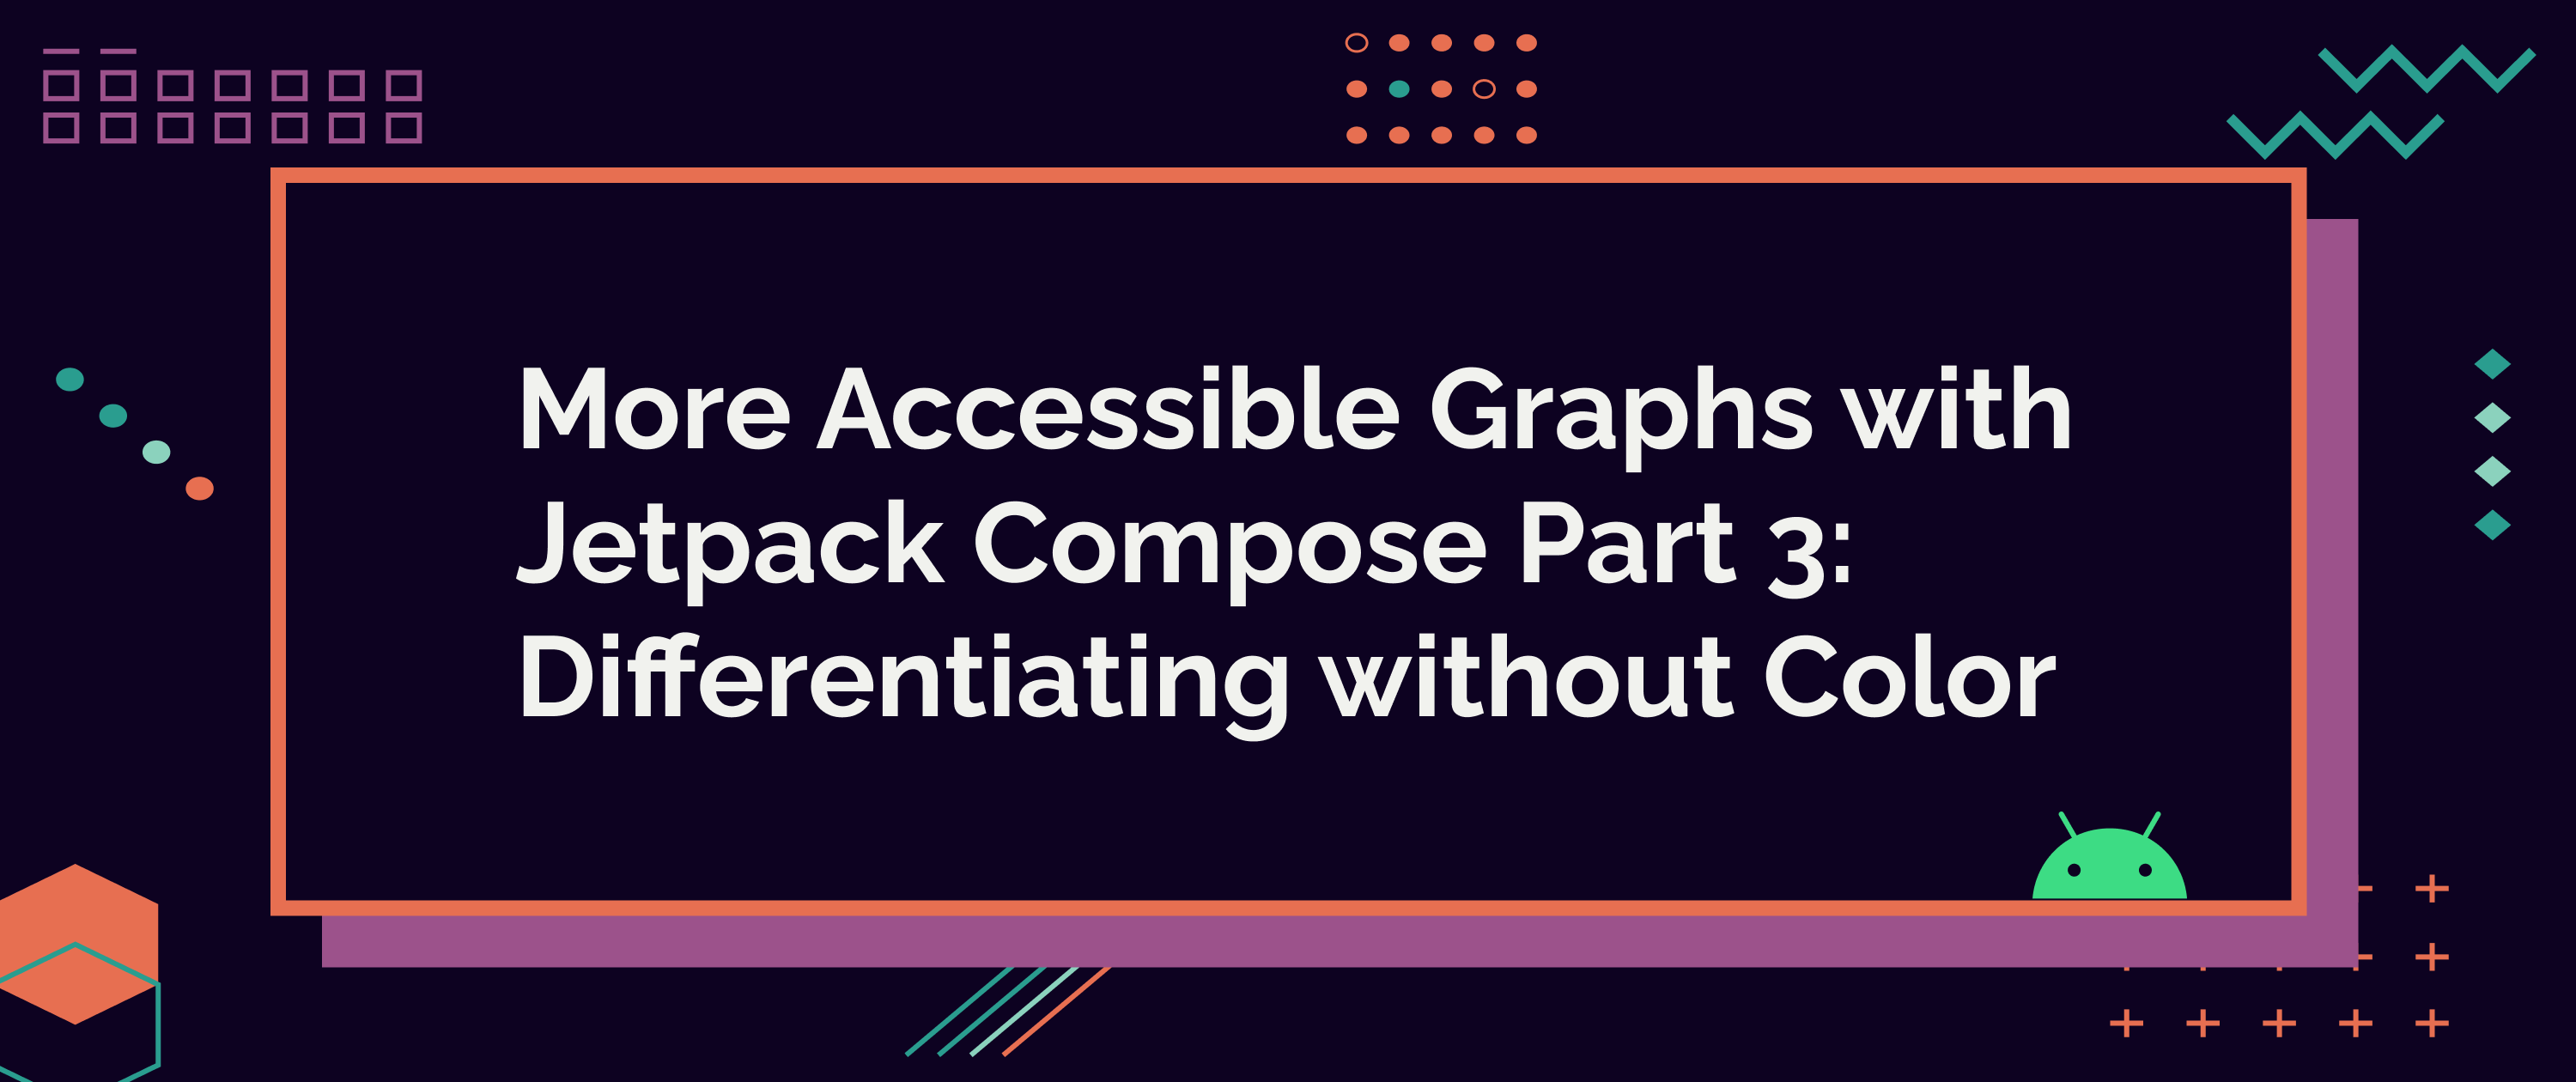 More Accessible Graphs with Jetpack Compose Part 3: Differentiating without Color.